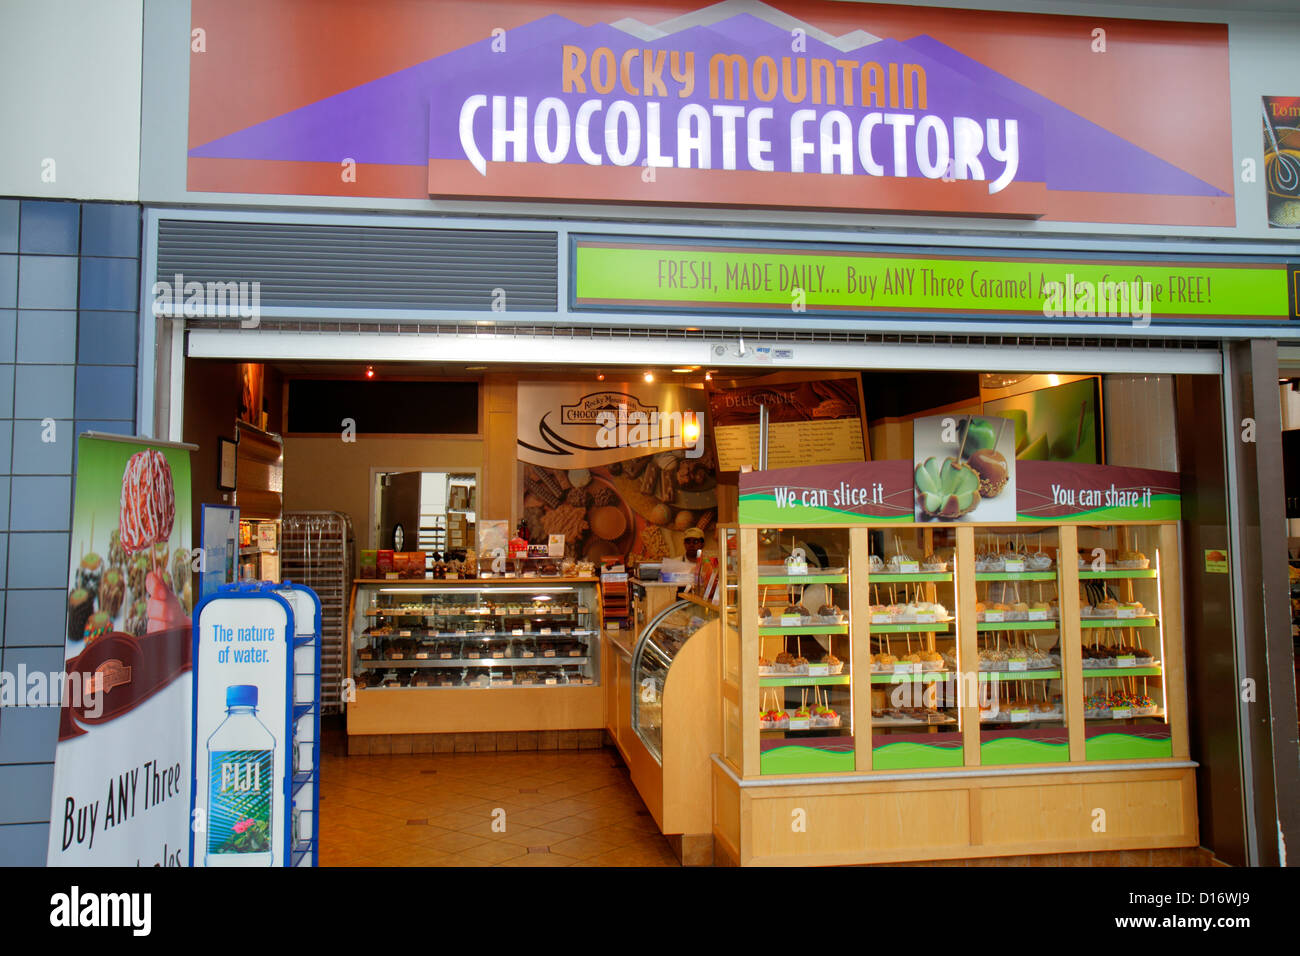 Illinois,IL Cook County,O'Hare International Airport,ORD,gate,Rocky Mountain Chocolate Factory,shopping shopper shoppers shop shops market markets mar Stock Photo